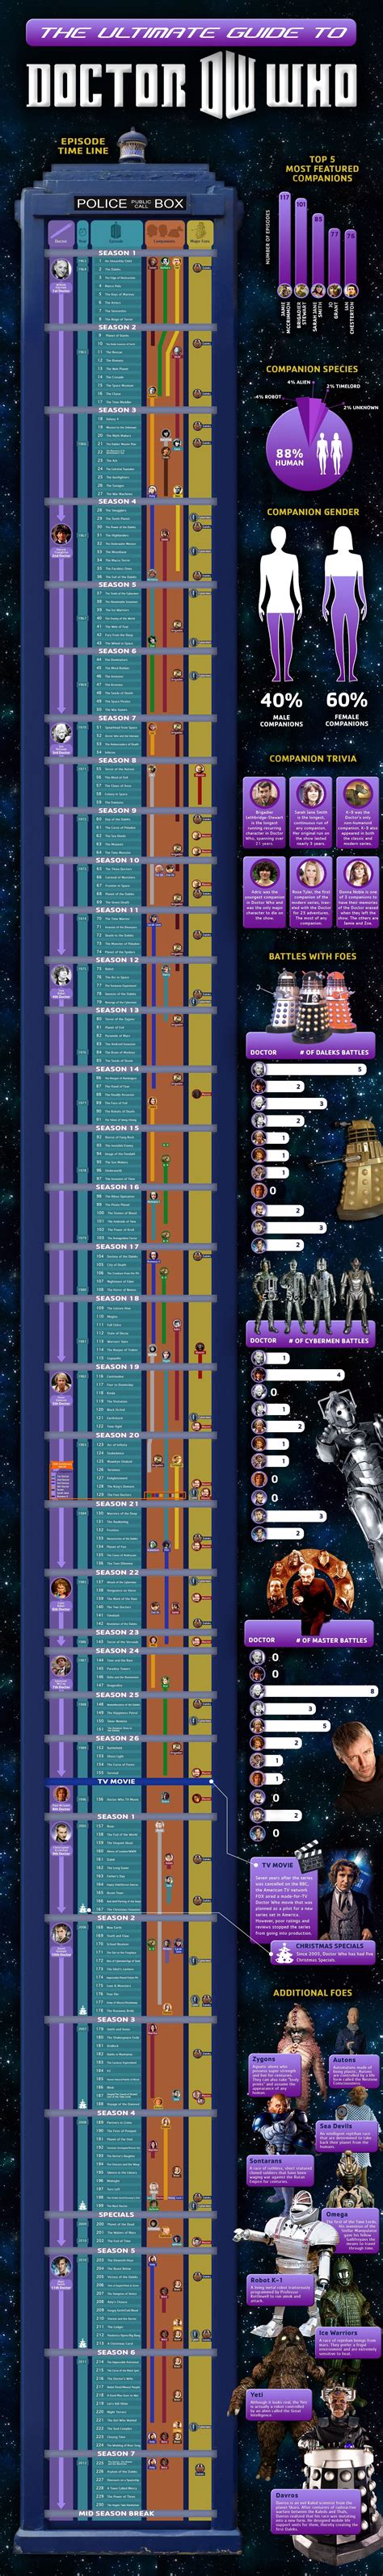 The Ultimate Guide To Dr Who Infographic Who Could Not